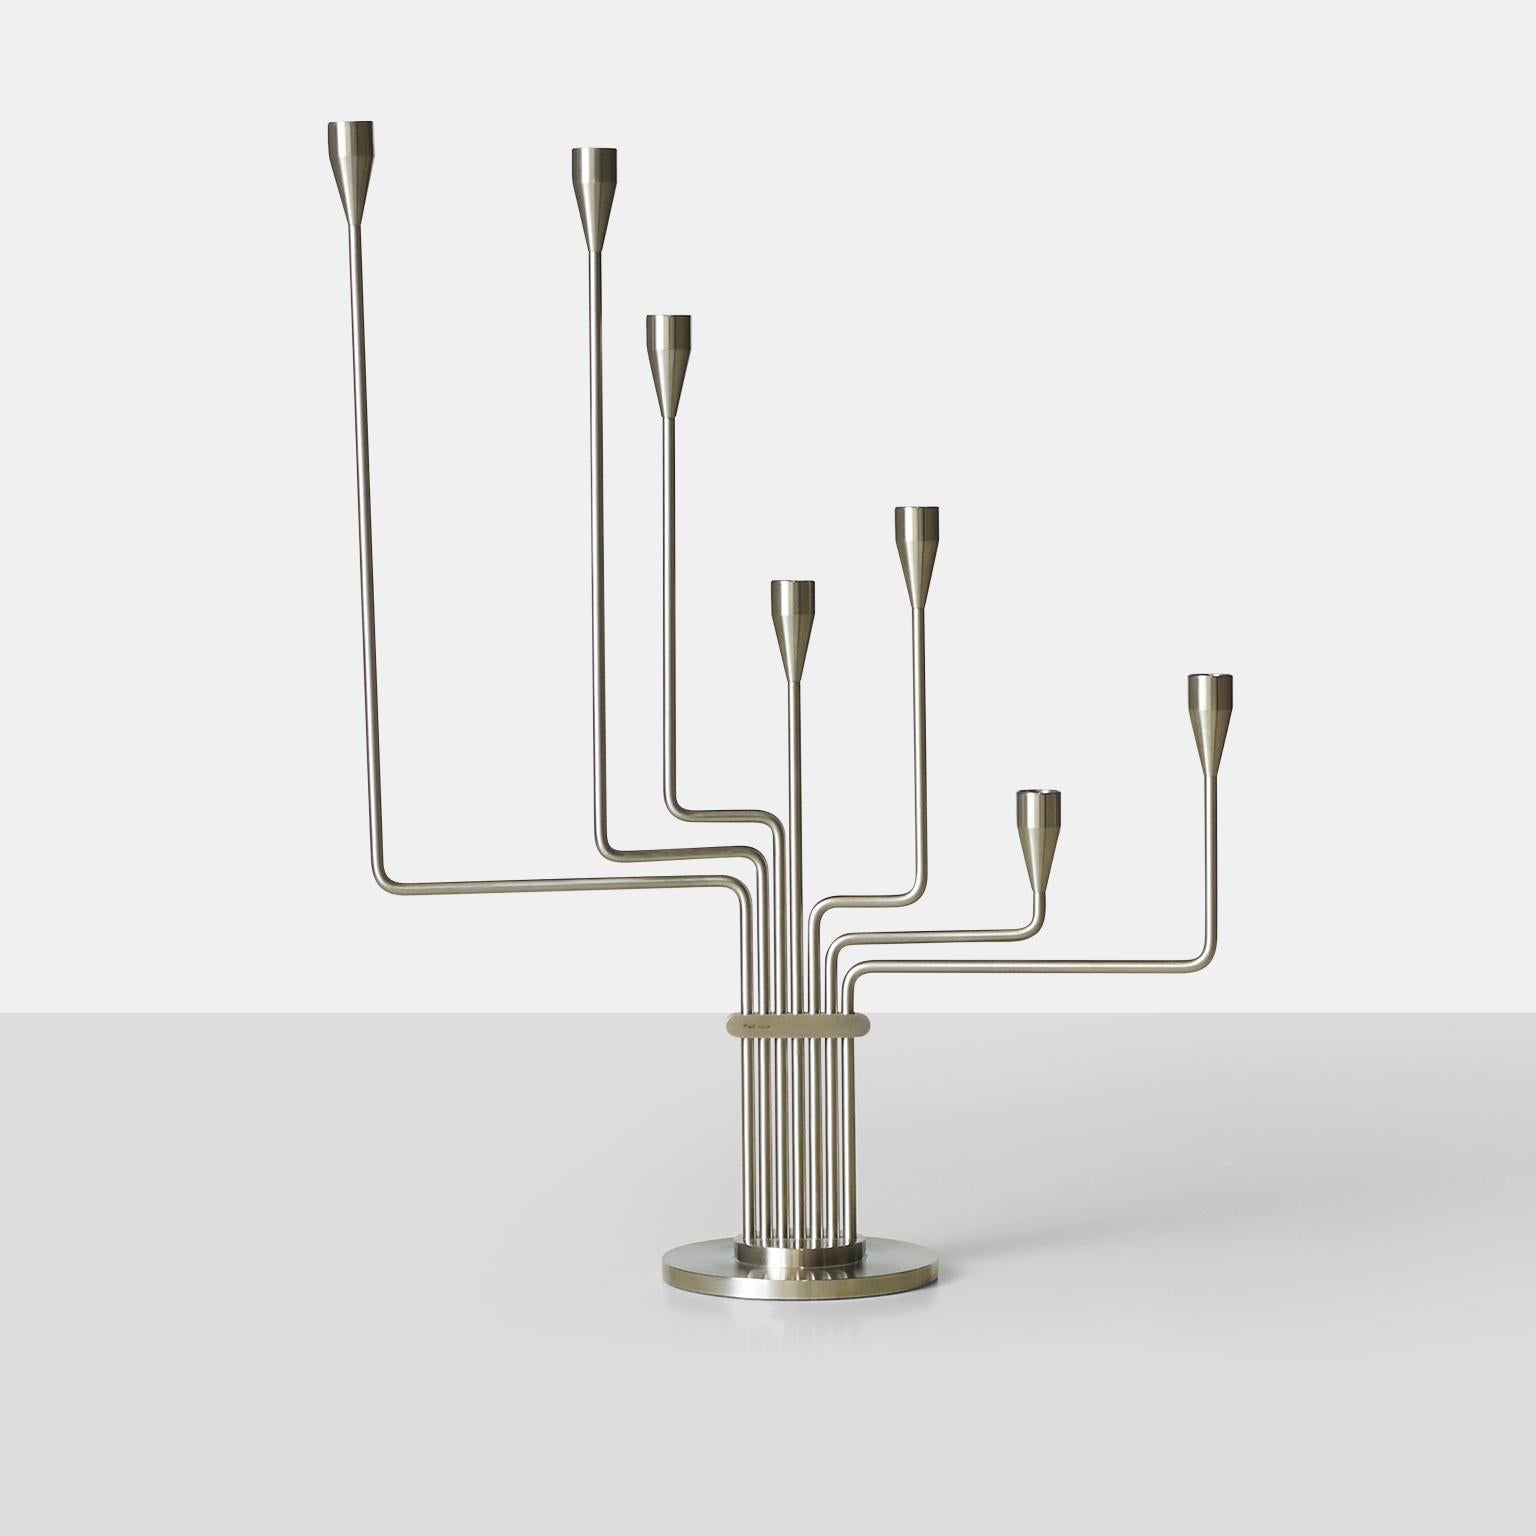 A Piet Hein candelabra in brushed steel. Known as either “Big Dipper” or “The Great Bear”, it was designed by Hein during his time in Argentina to remind him of his home in Denmark. The arms of the candelabra are adjustable.